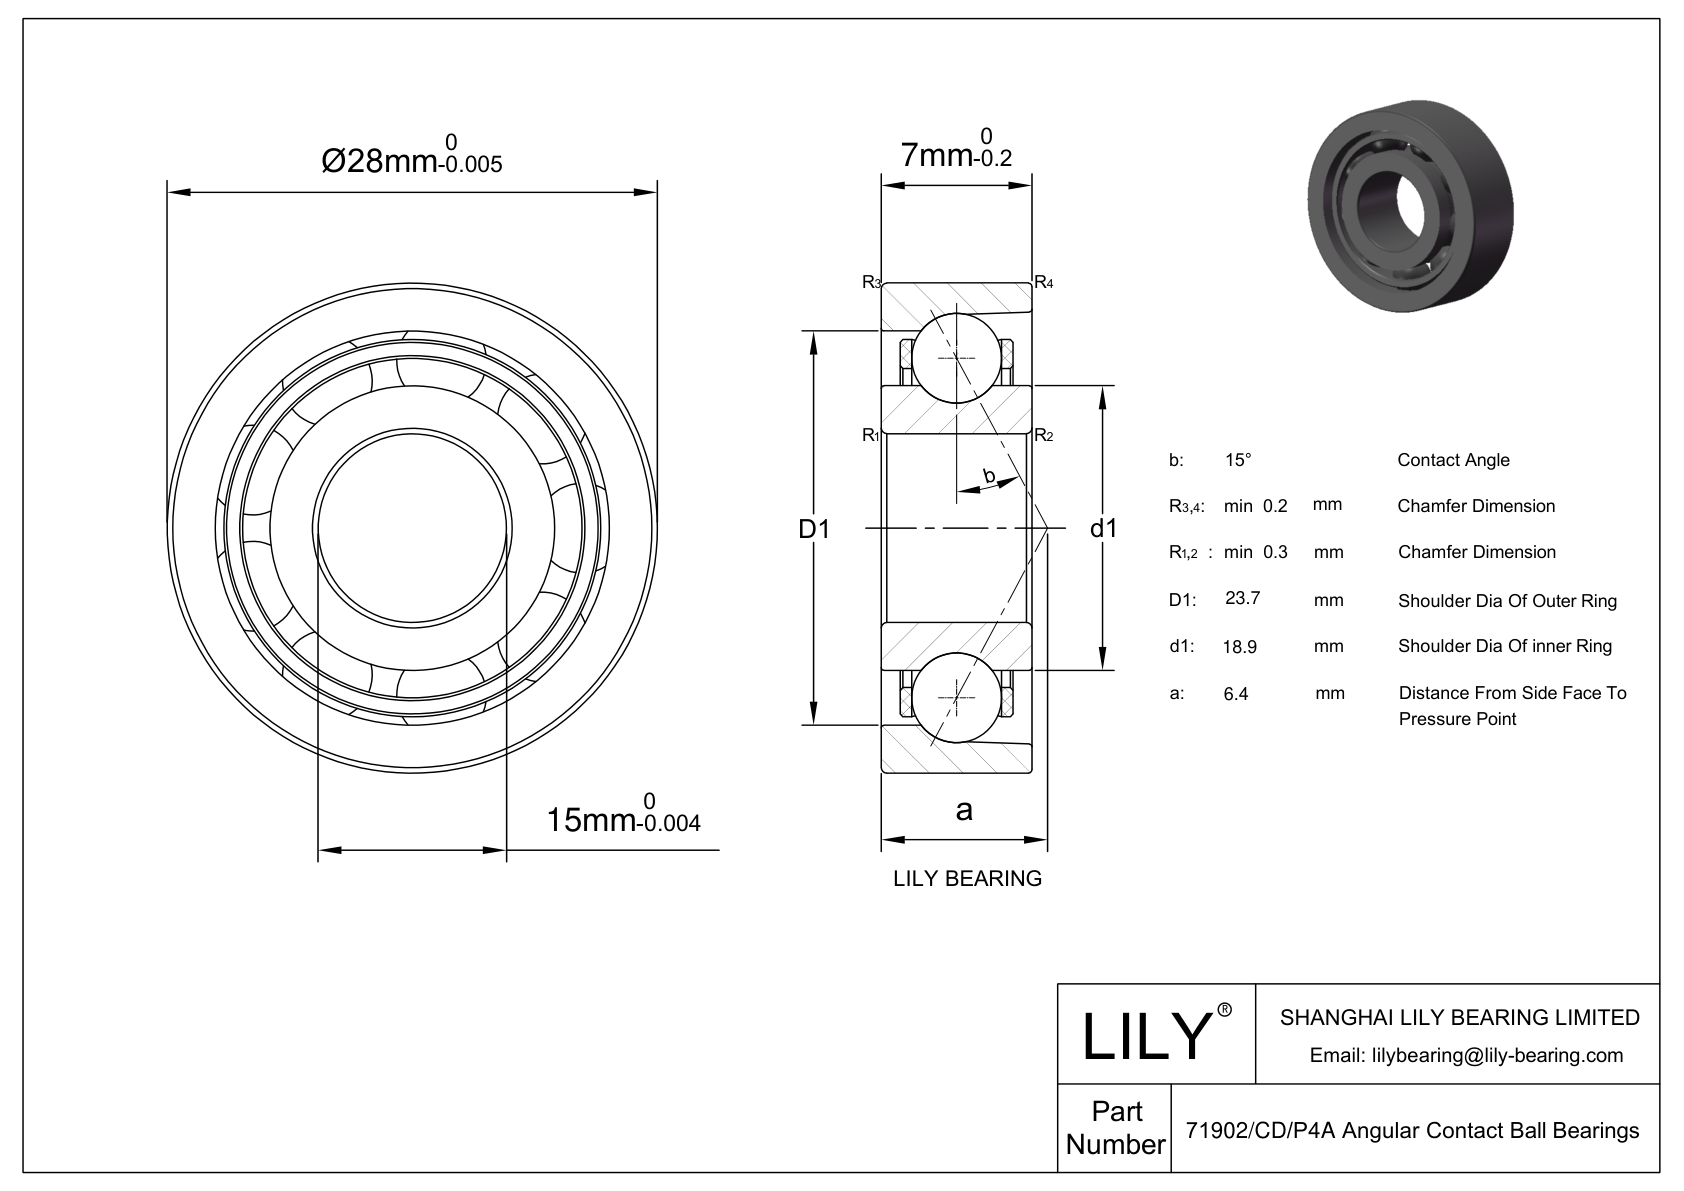 HSS71902-C-T-P4S-UL FAG Super Precision Angular Contact Spindle Bearing cad drawing